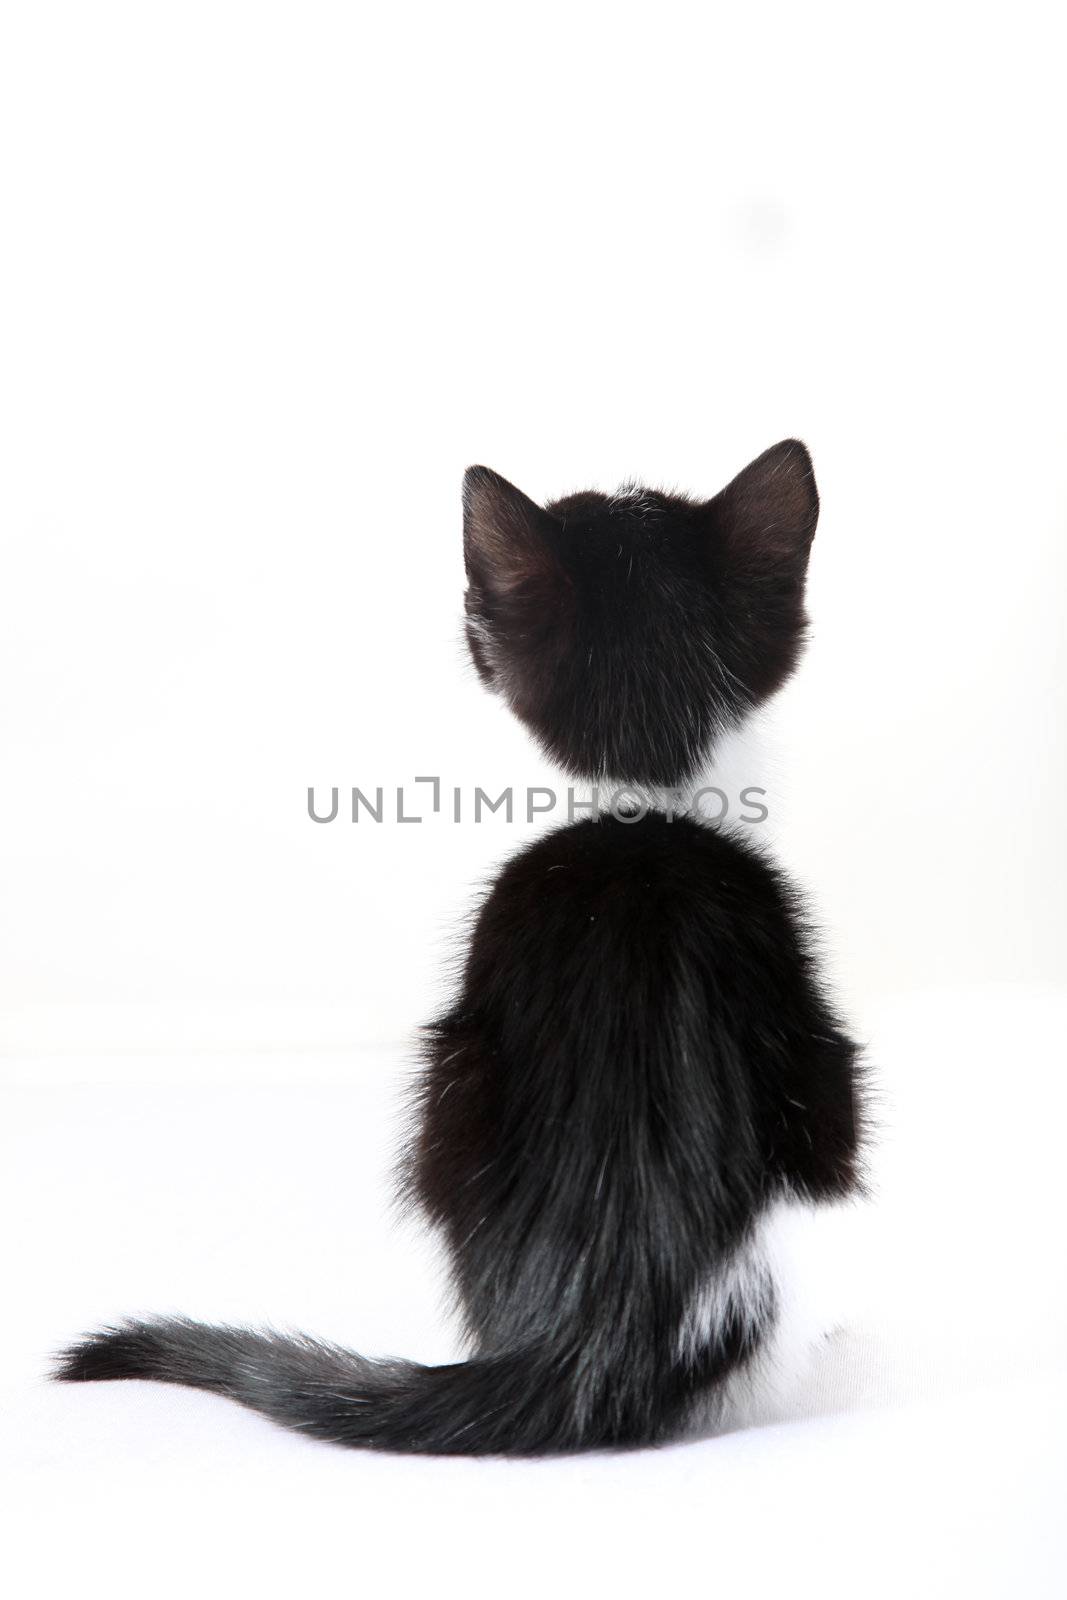 kitten from behind against a white background - cutout